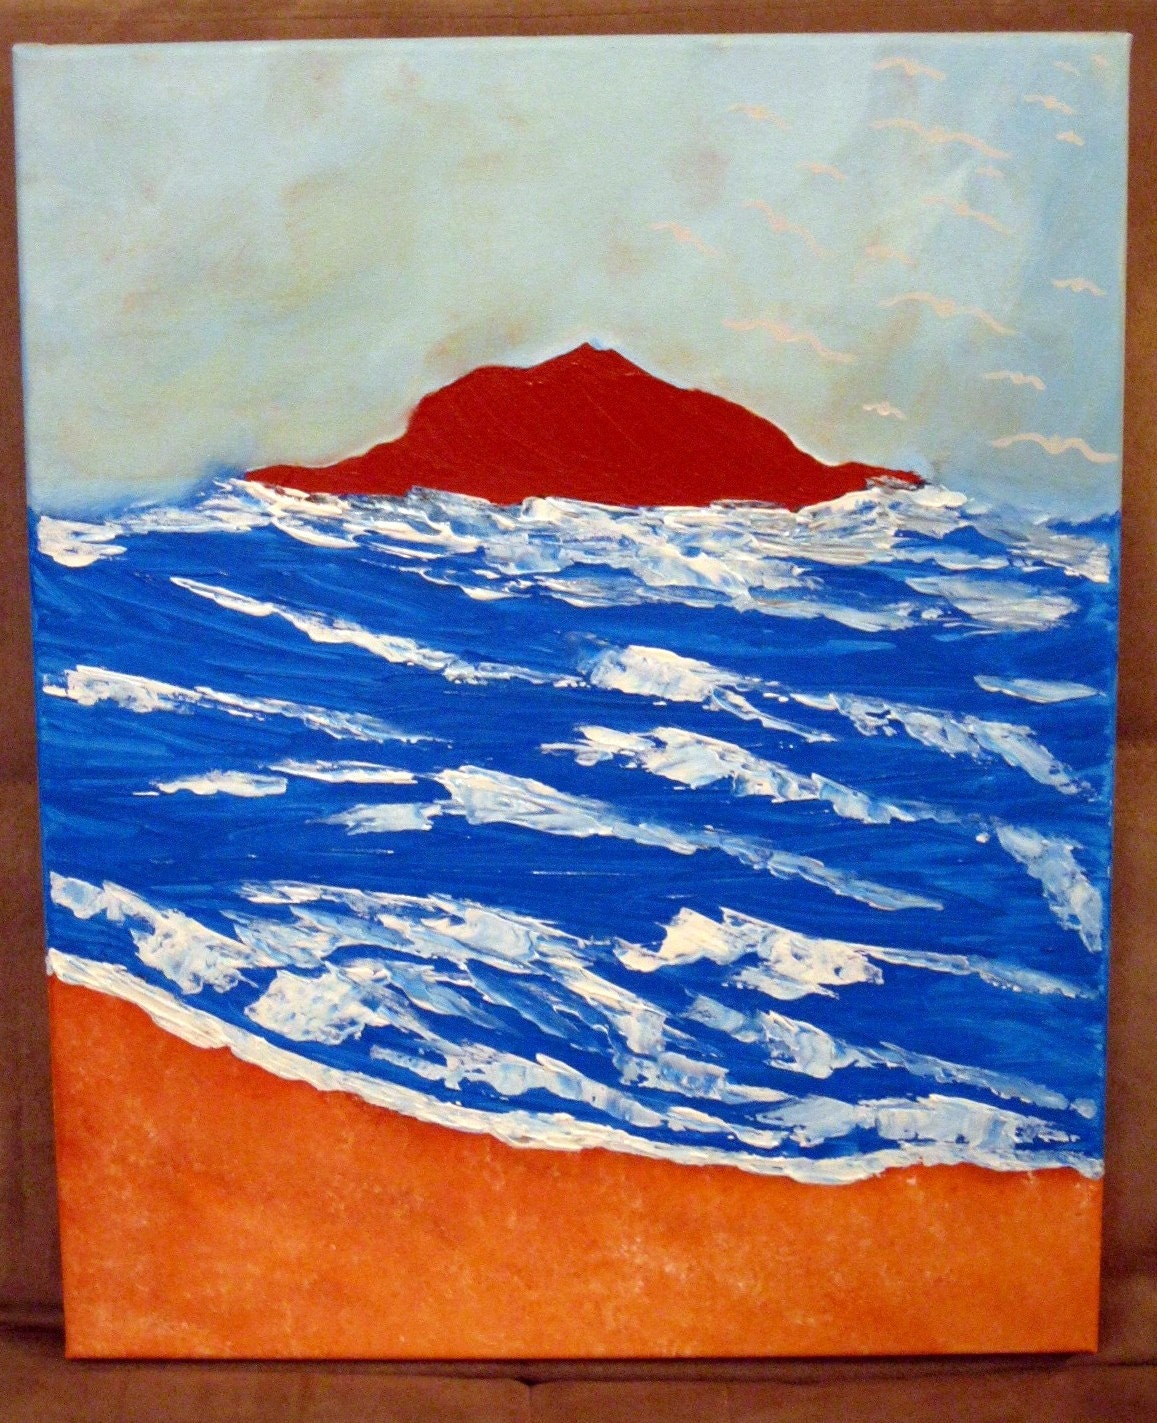 Rough Waters is an Original 16x20 Acrylic Painting on a Stretched Canvas